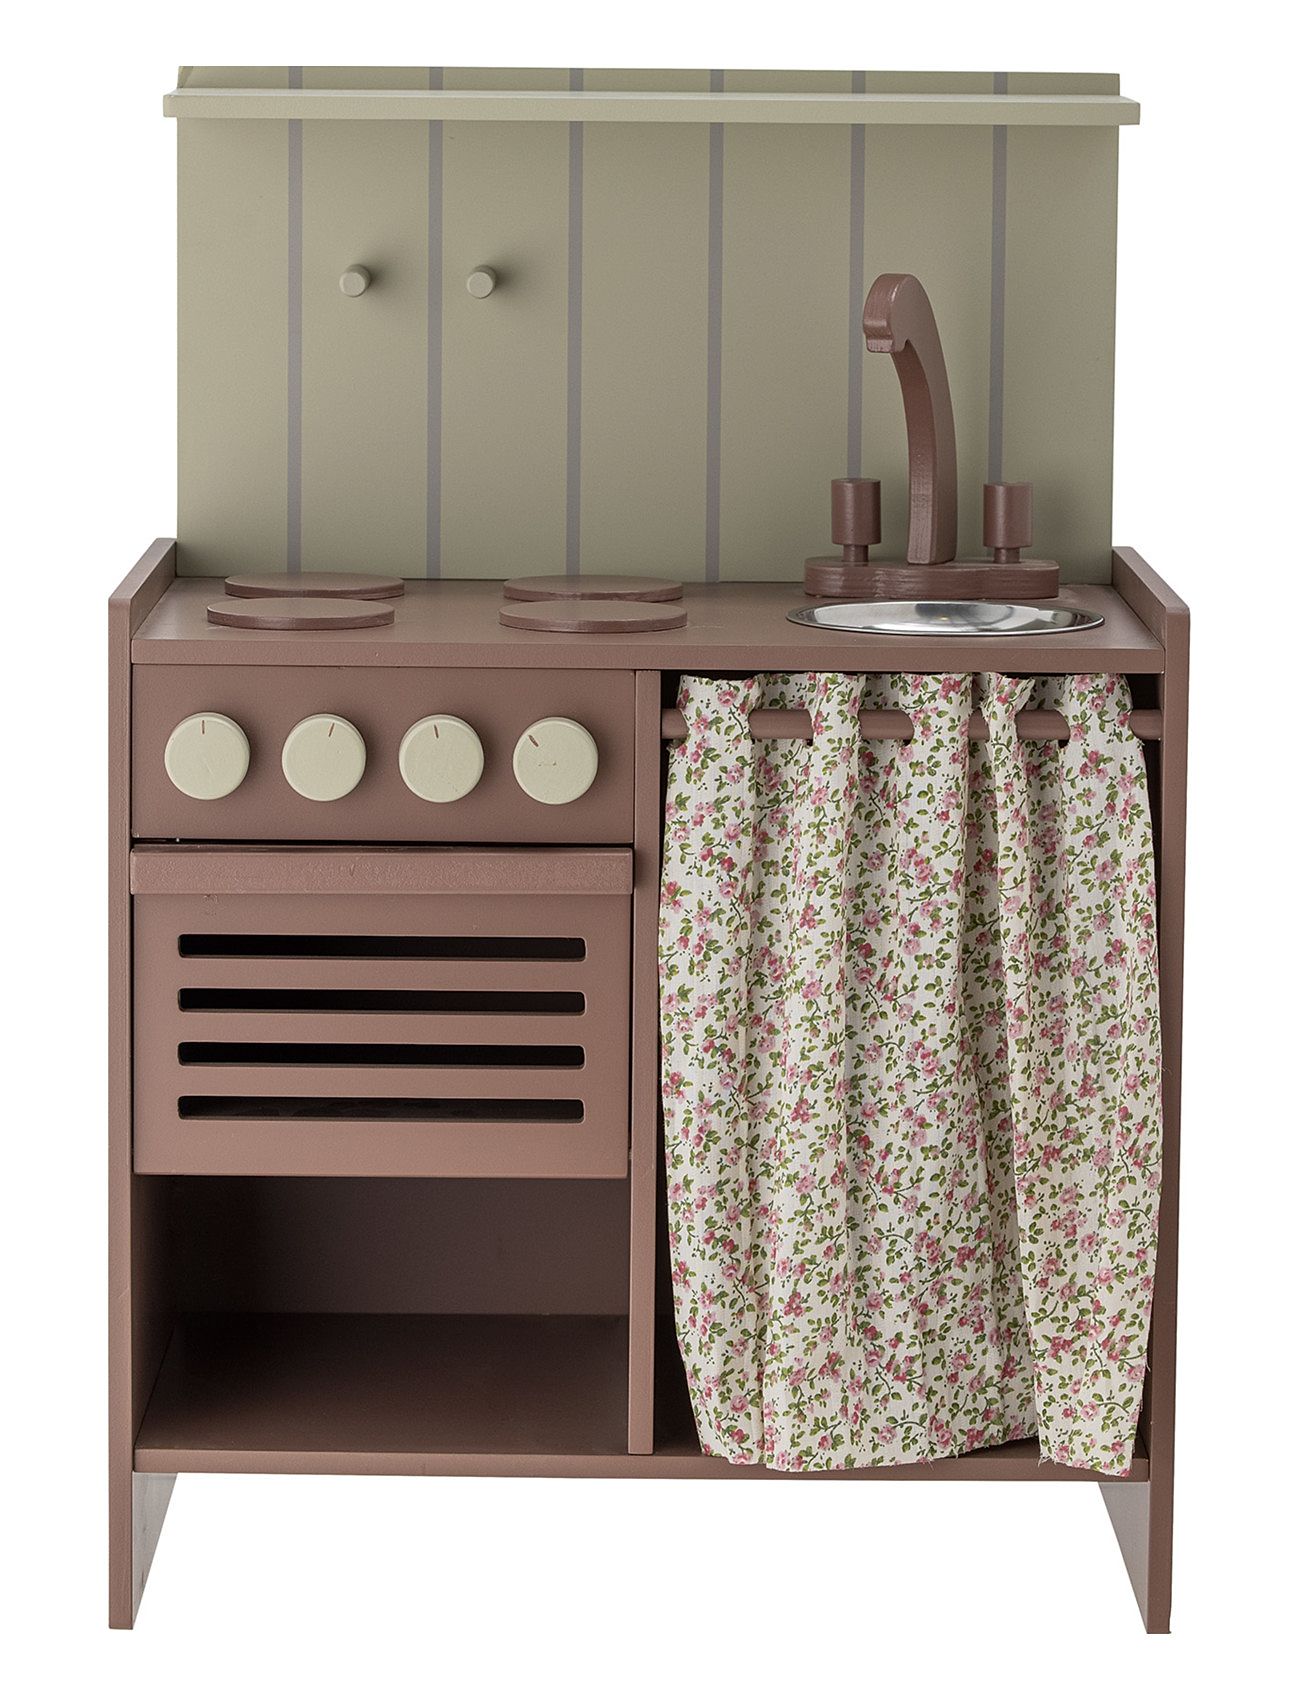 Pippi Mini Stove Toys Toy Kitchen & Accessories Toy Kitchens Brown Bloomingville